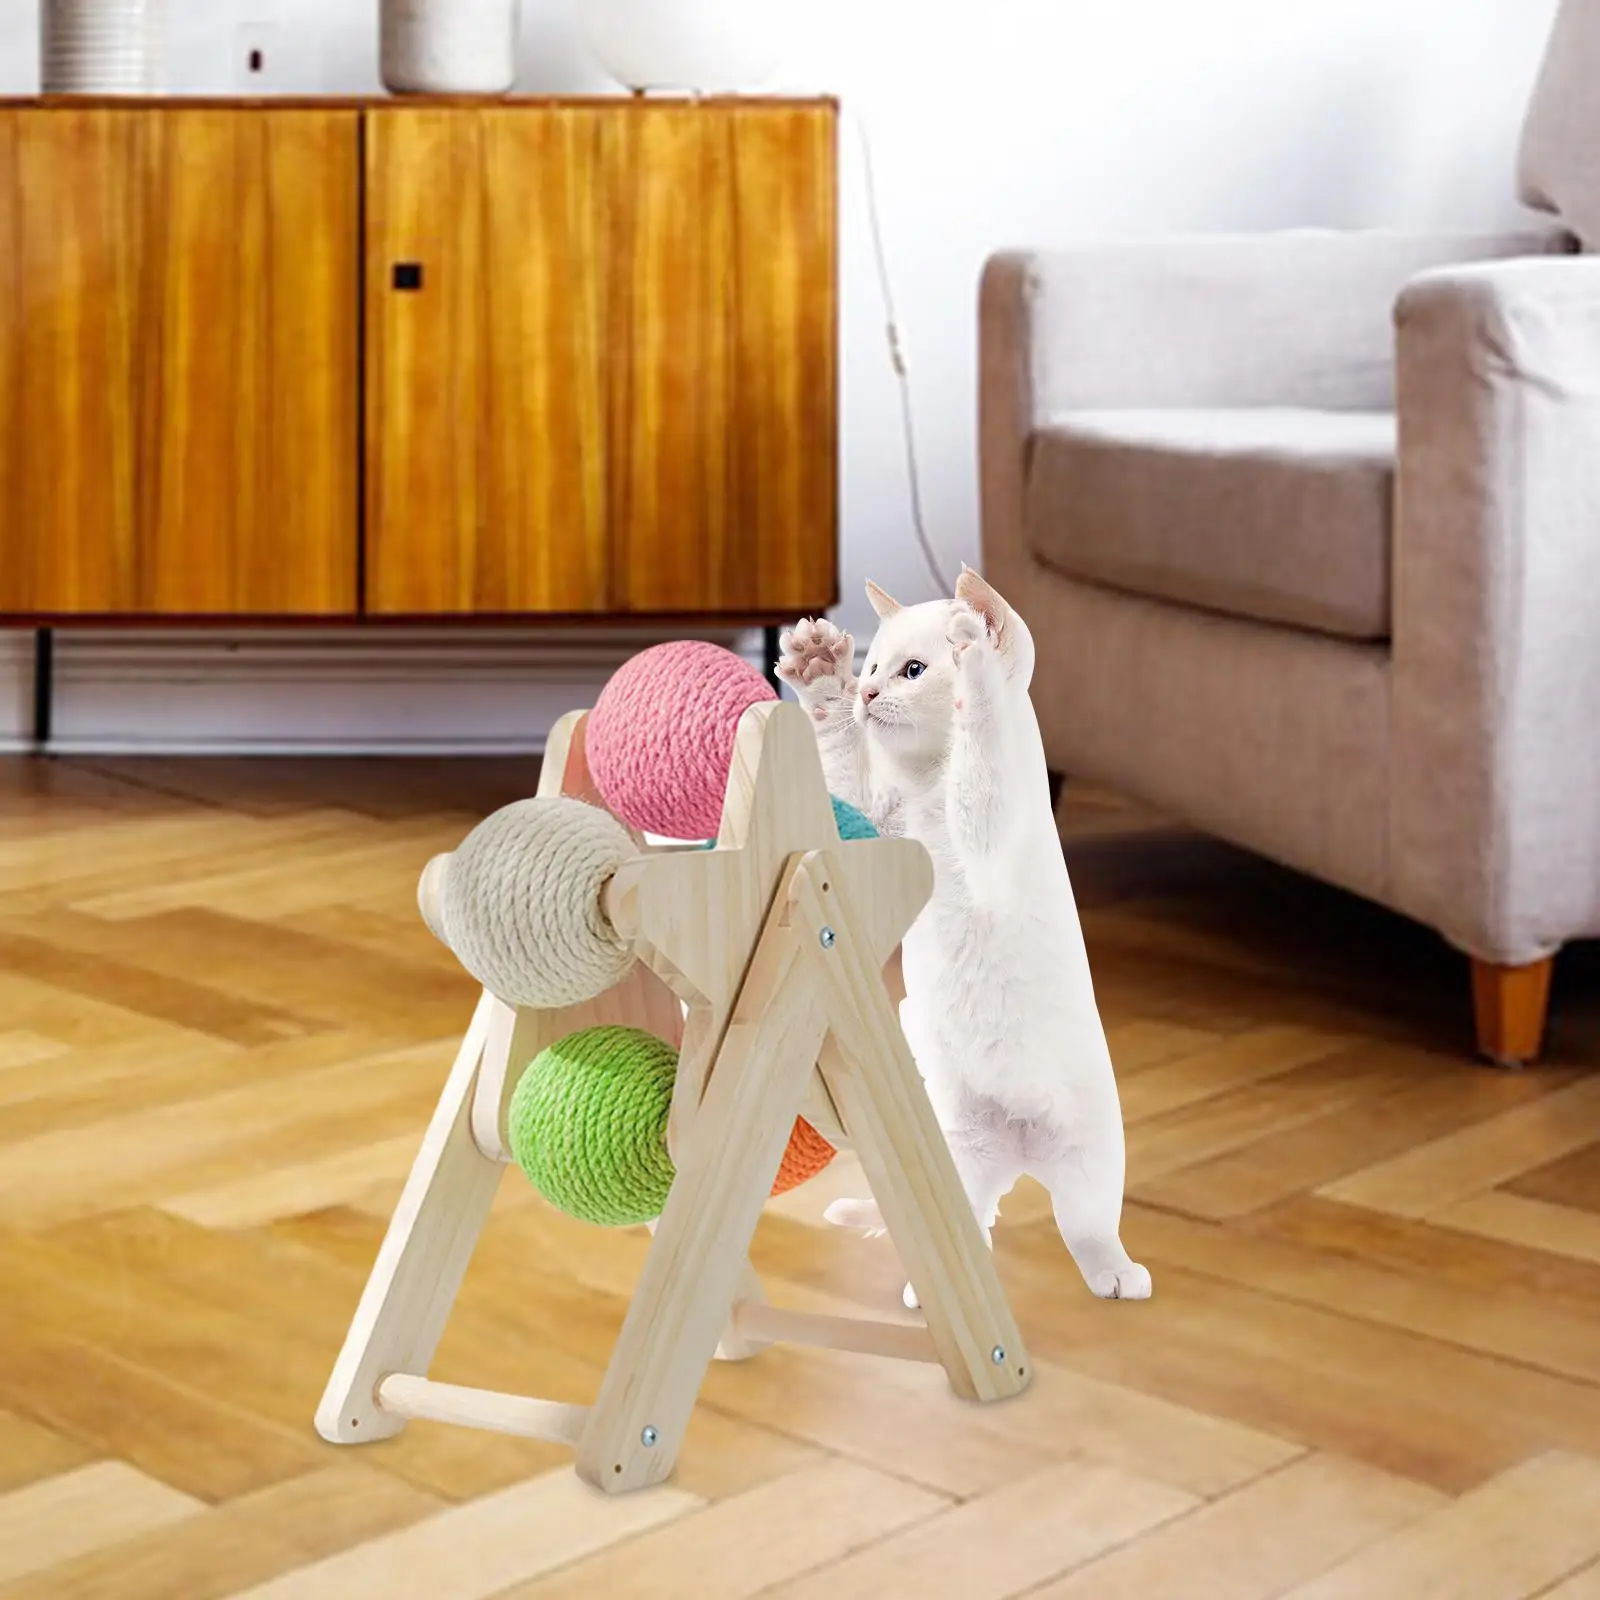 Wooden Cat Scratching Ball Pet Furniture Sisal Solid Wood Vertical Interactive Wear Resistant Sisal Rope Balls Scratcher Toy